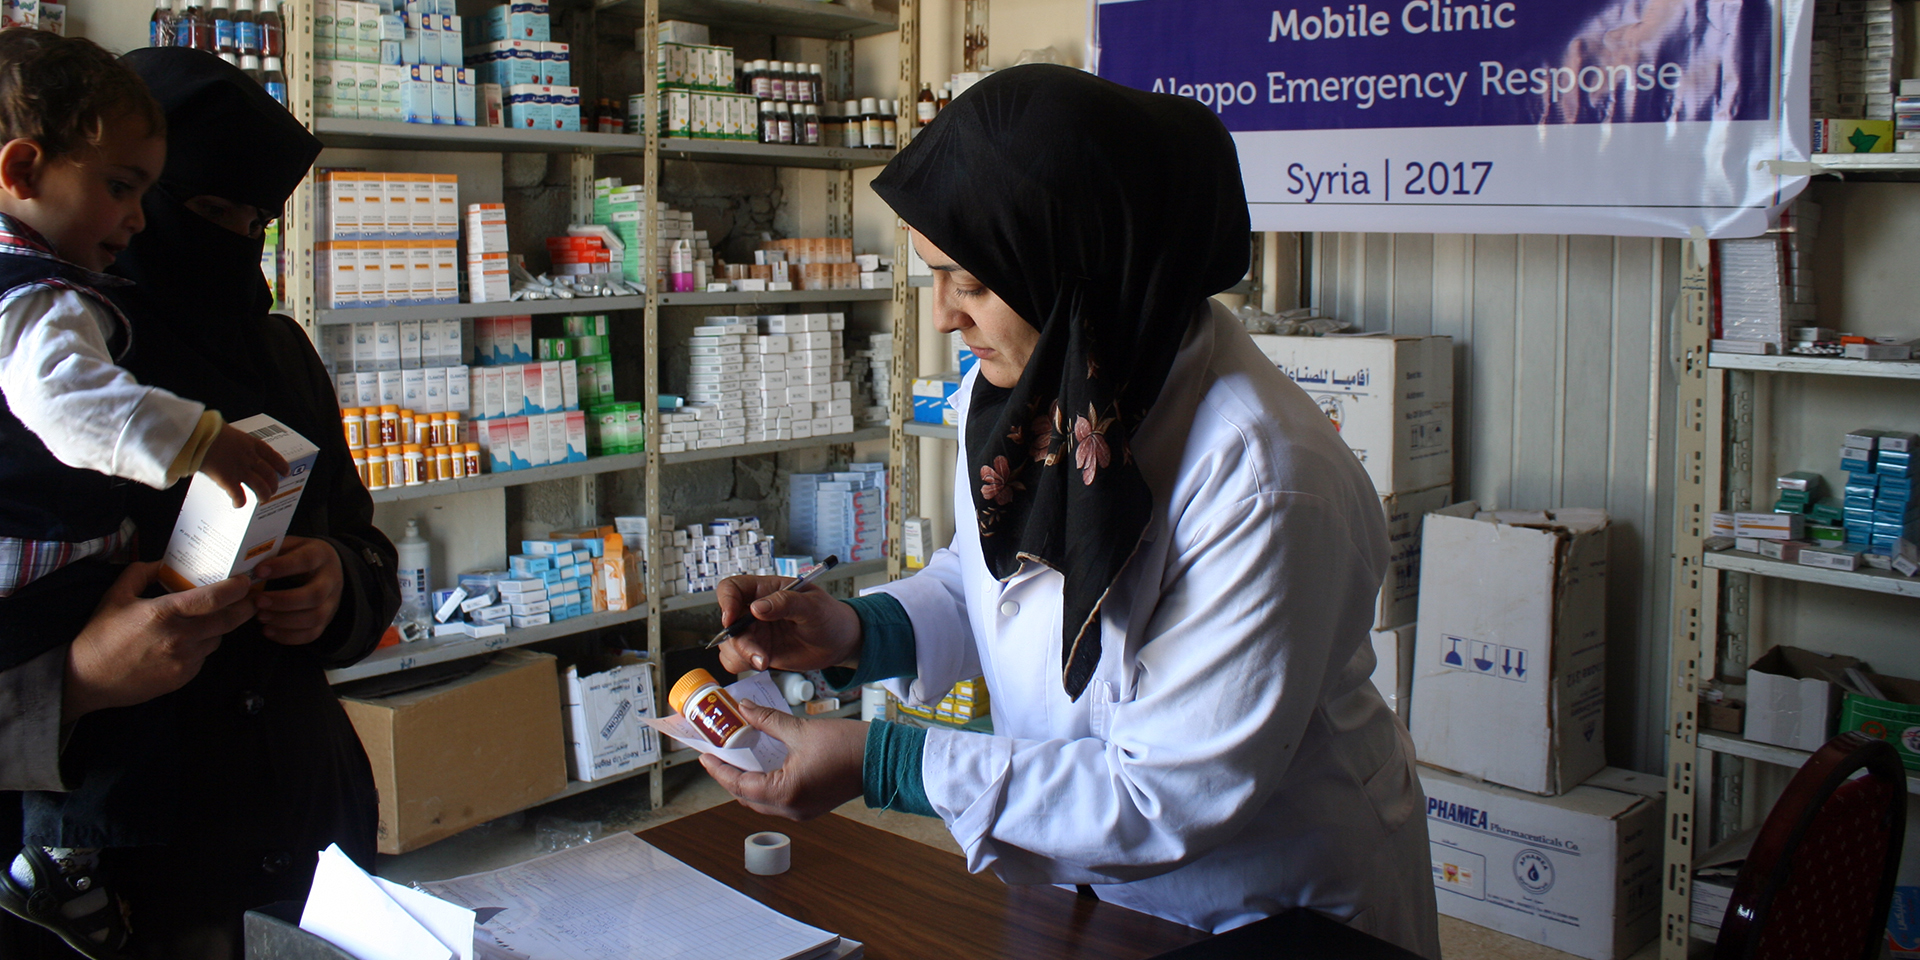 Syria mobile health clinic